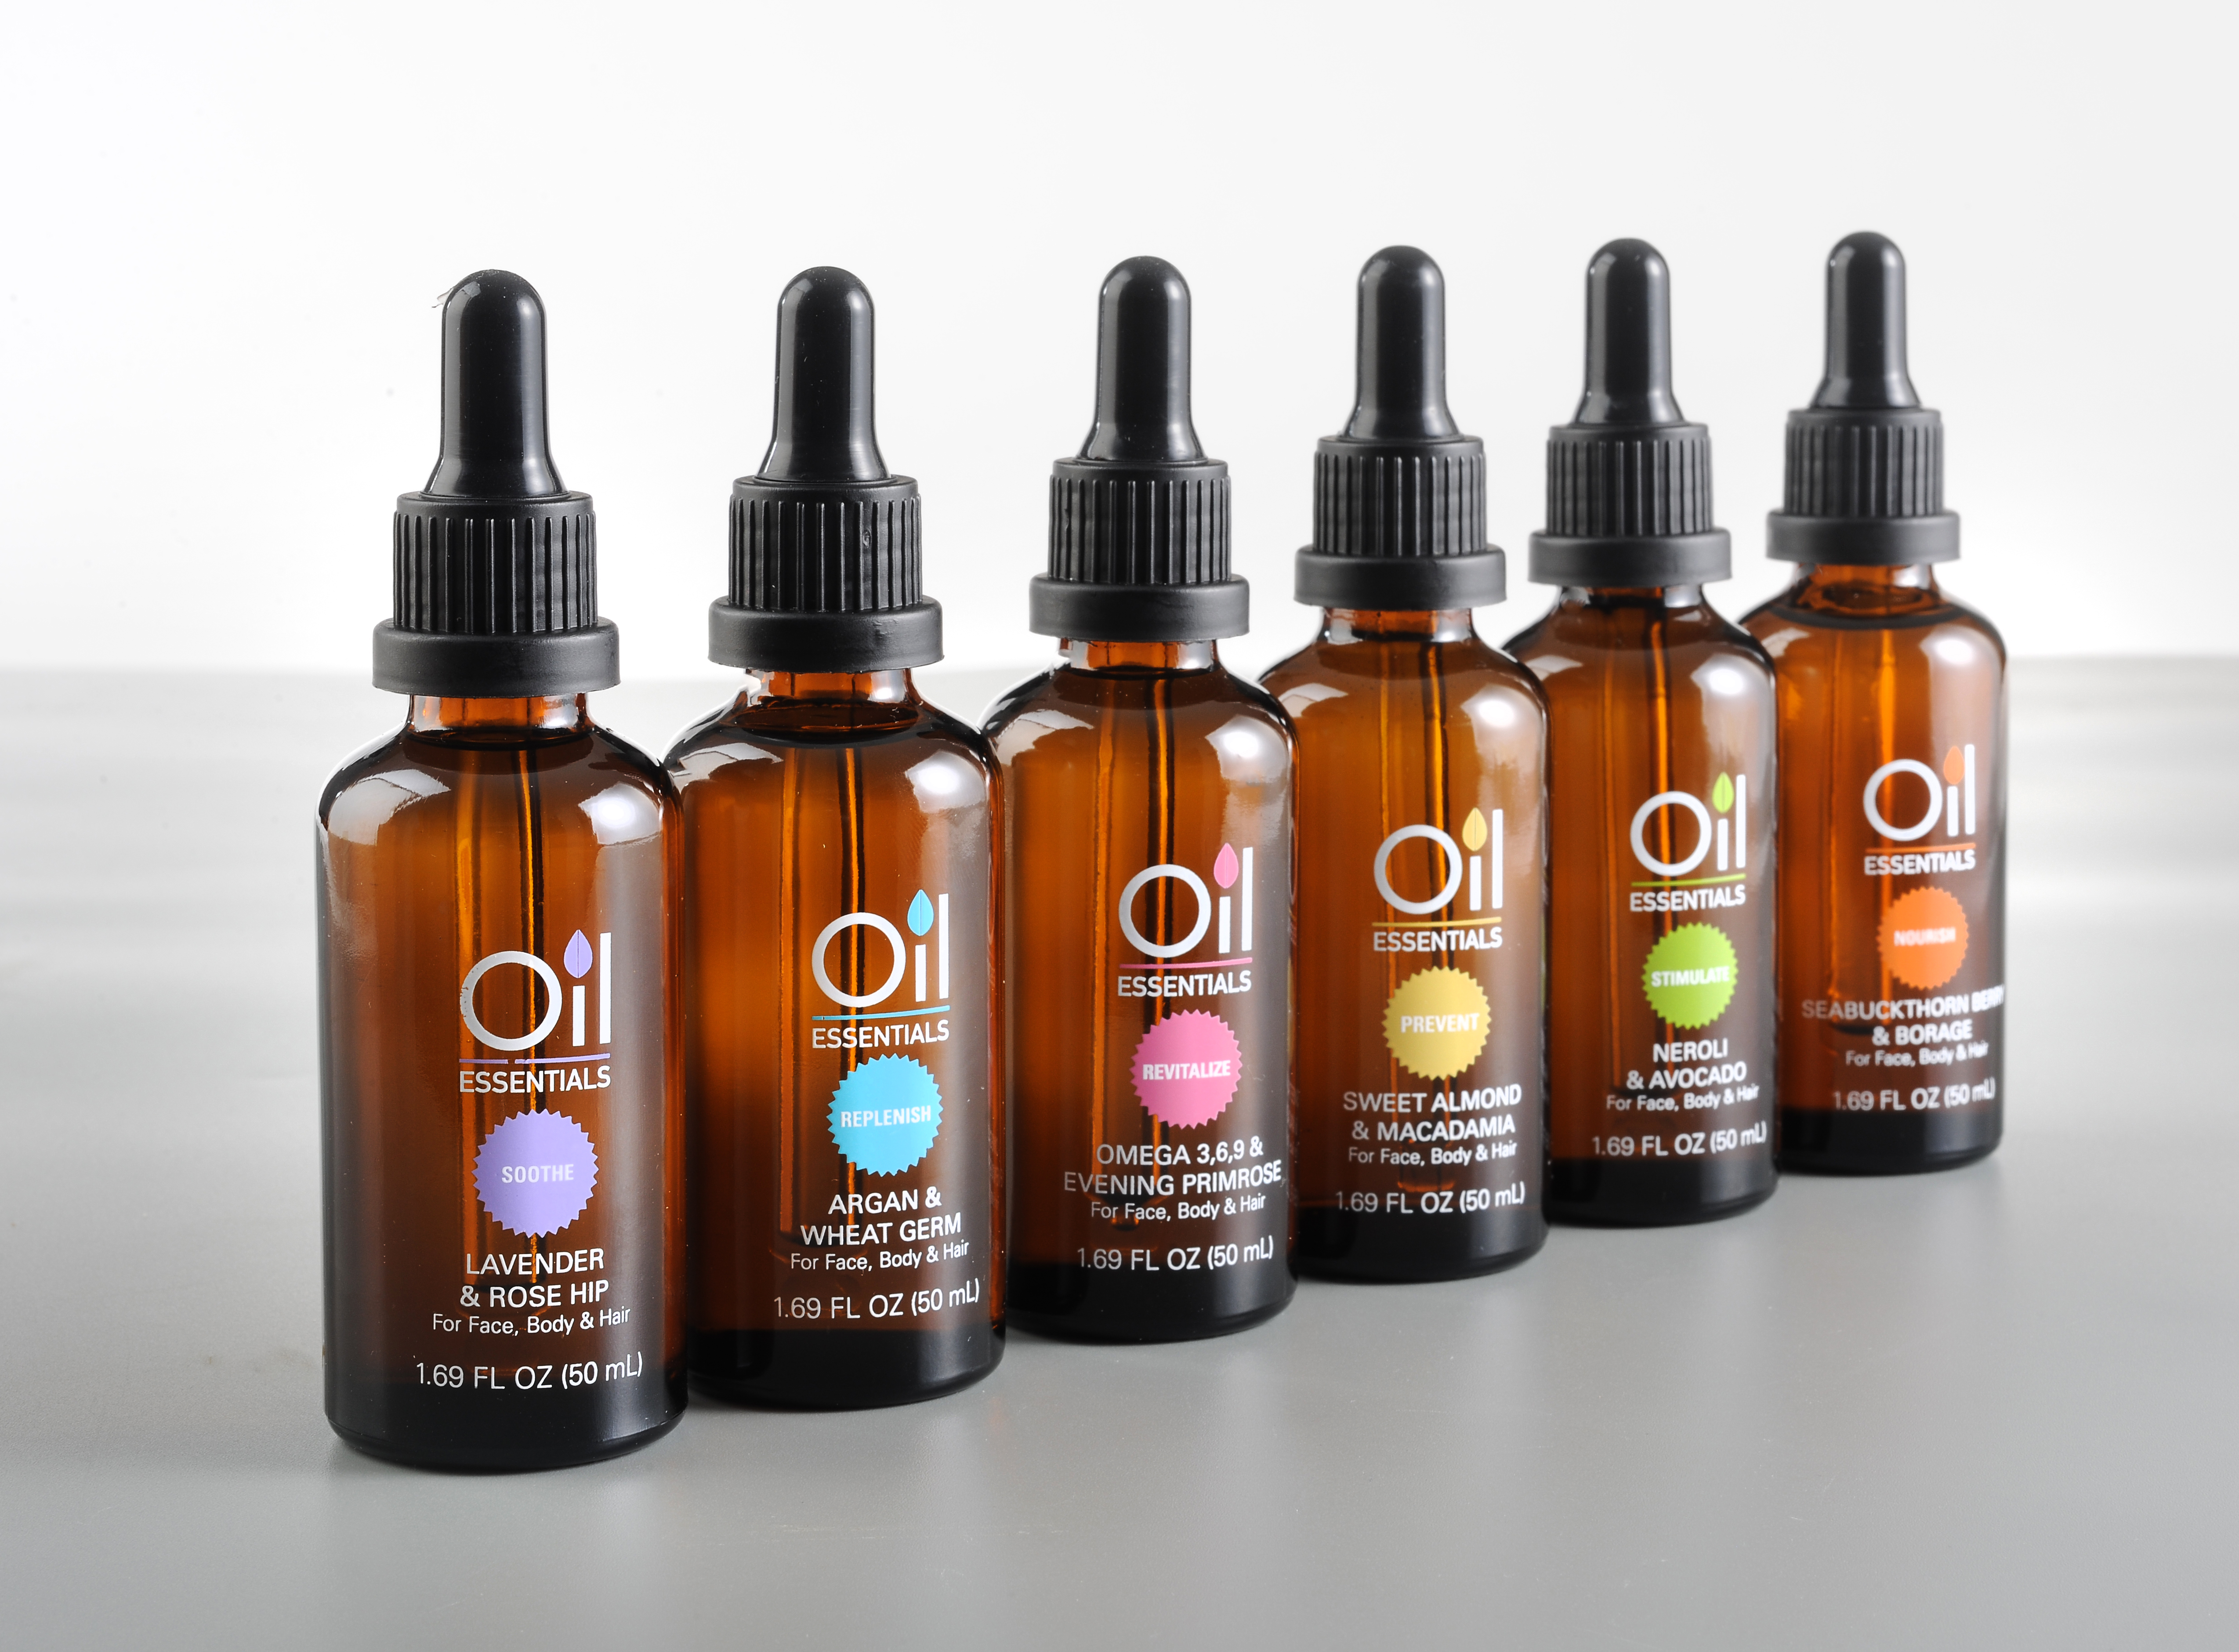 Launched exclusively at Rite Aid in June, the Oil Essentials brand from Emilia Personal Care, is a total solution product line of 6 luxurious multi-purpose beauty oils for hair, face and body.